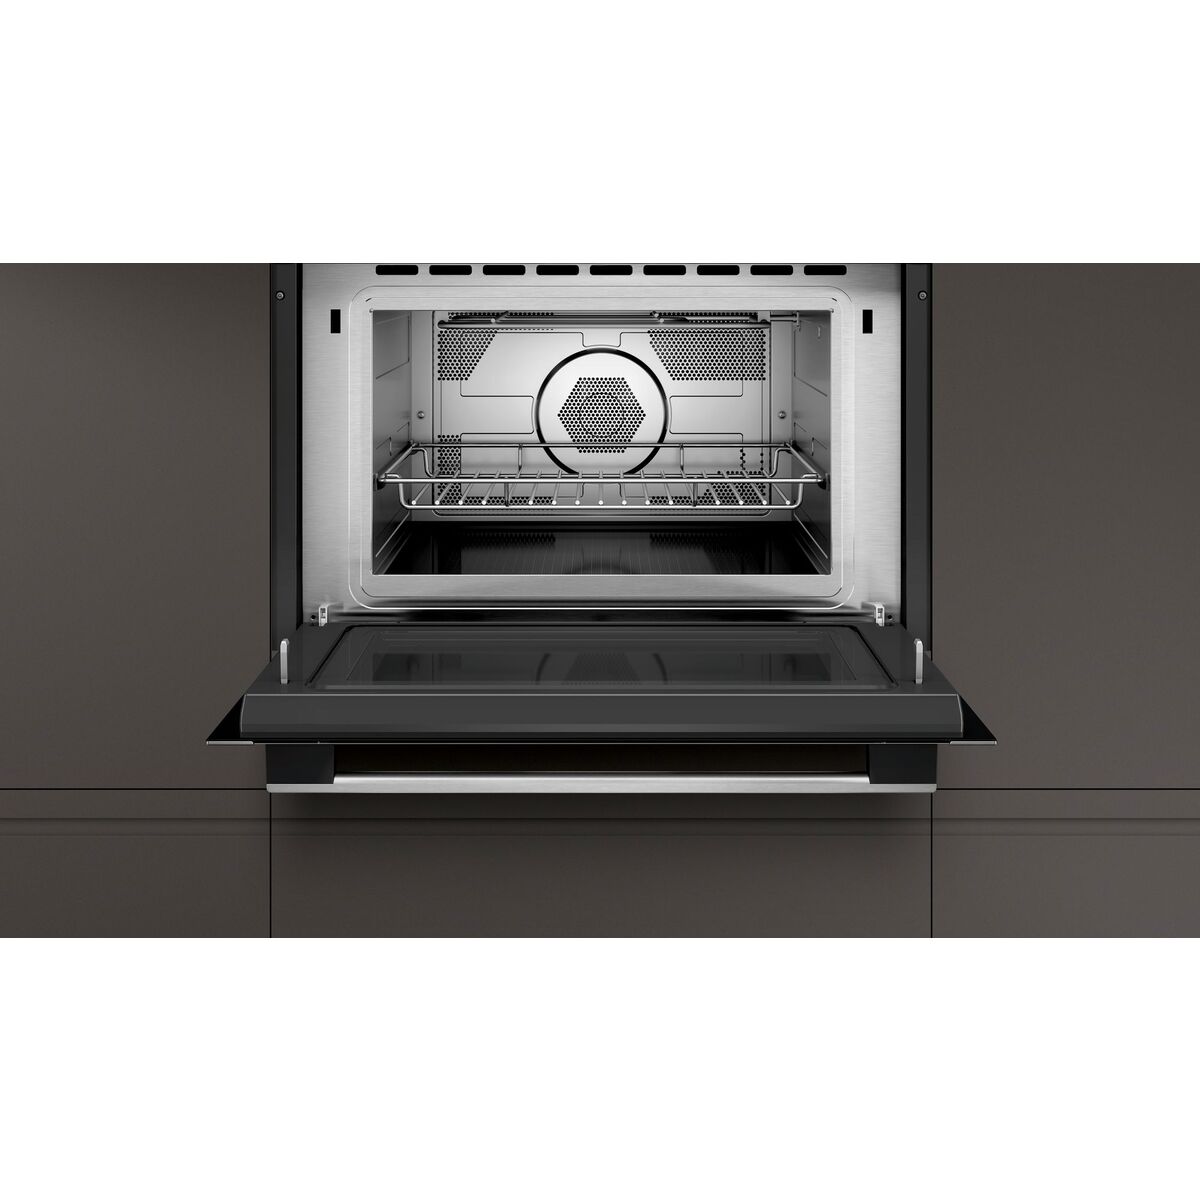 NEFF C1AMG84N0B Built-in compact Oven with Microwave Function